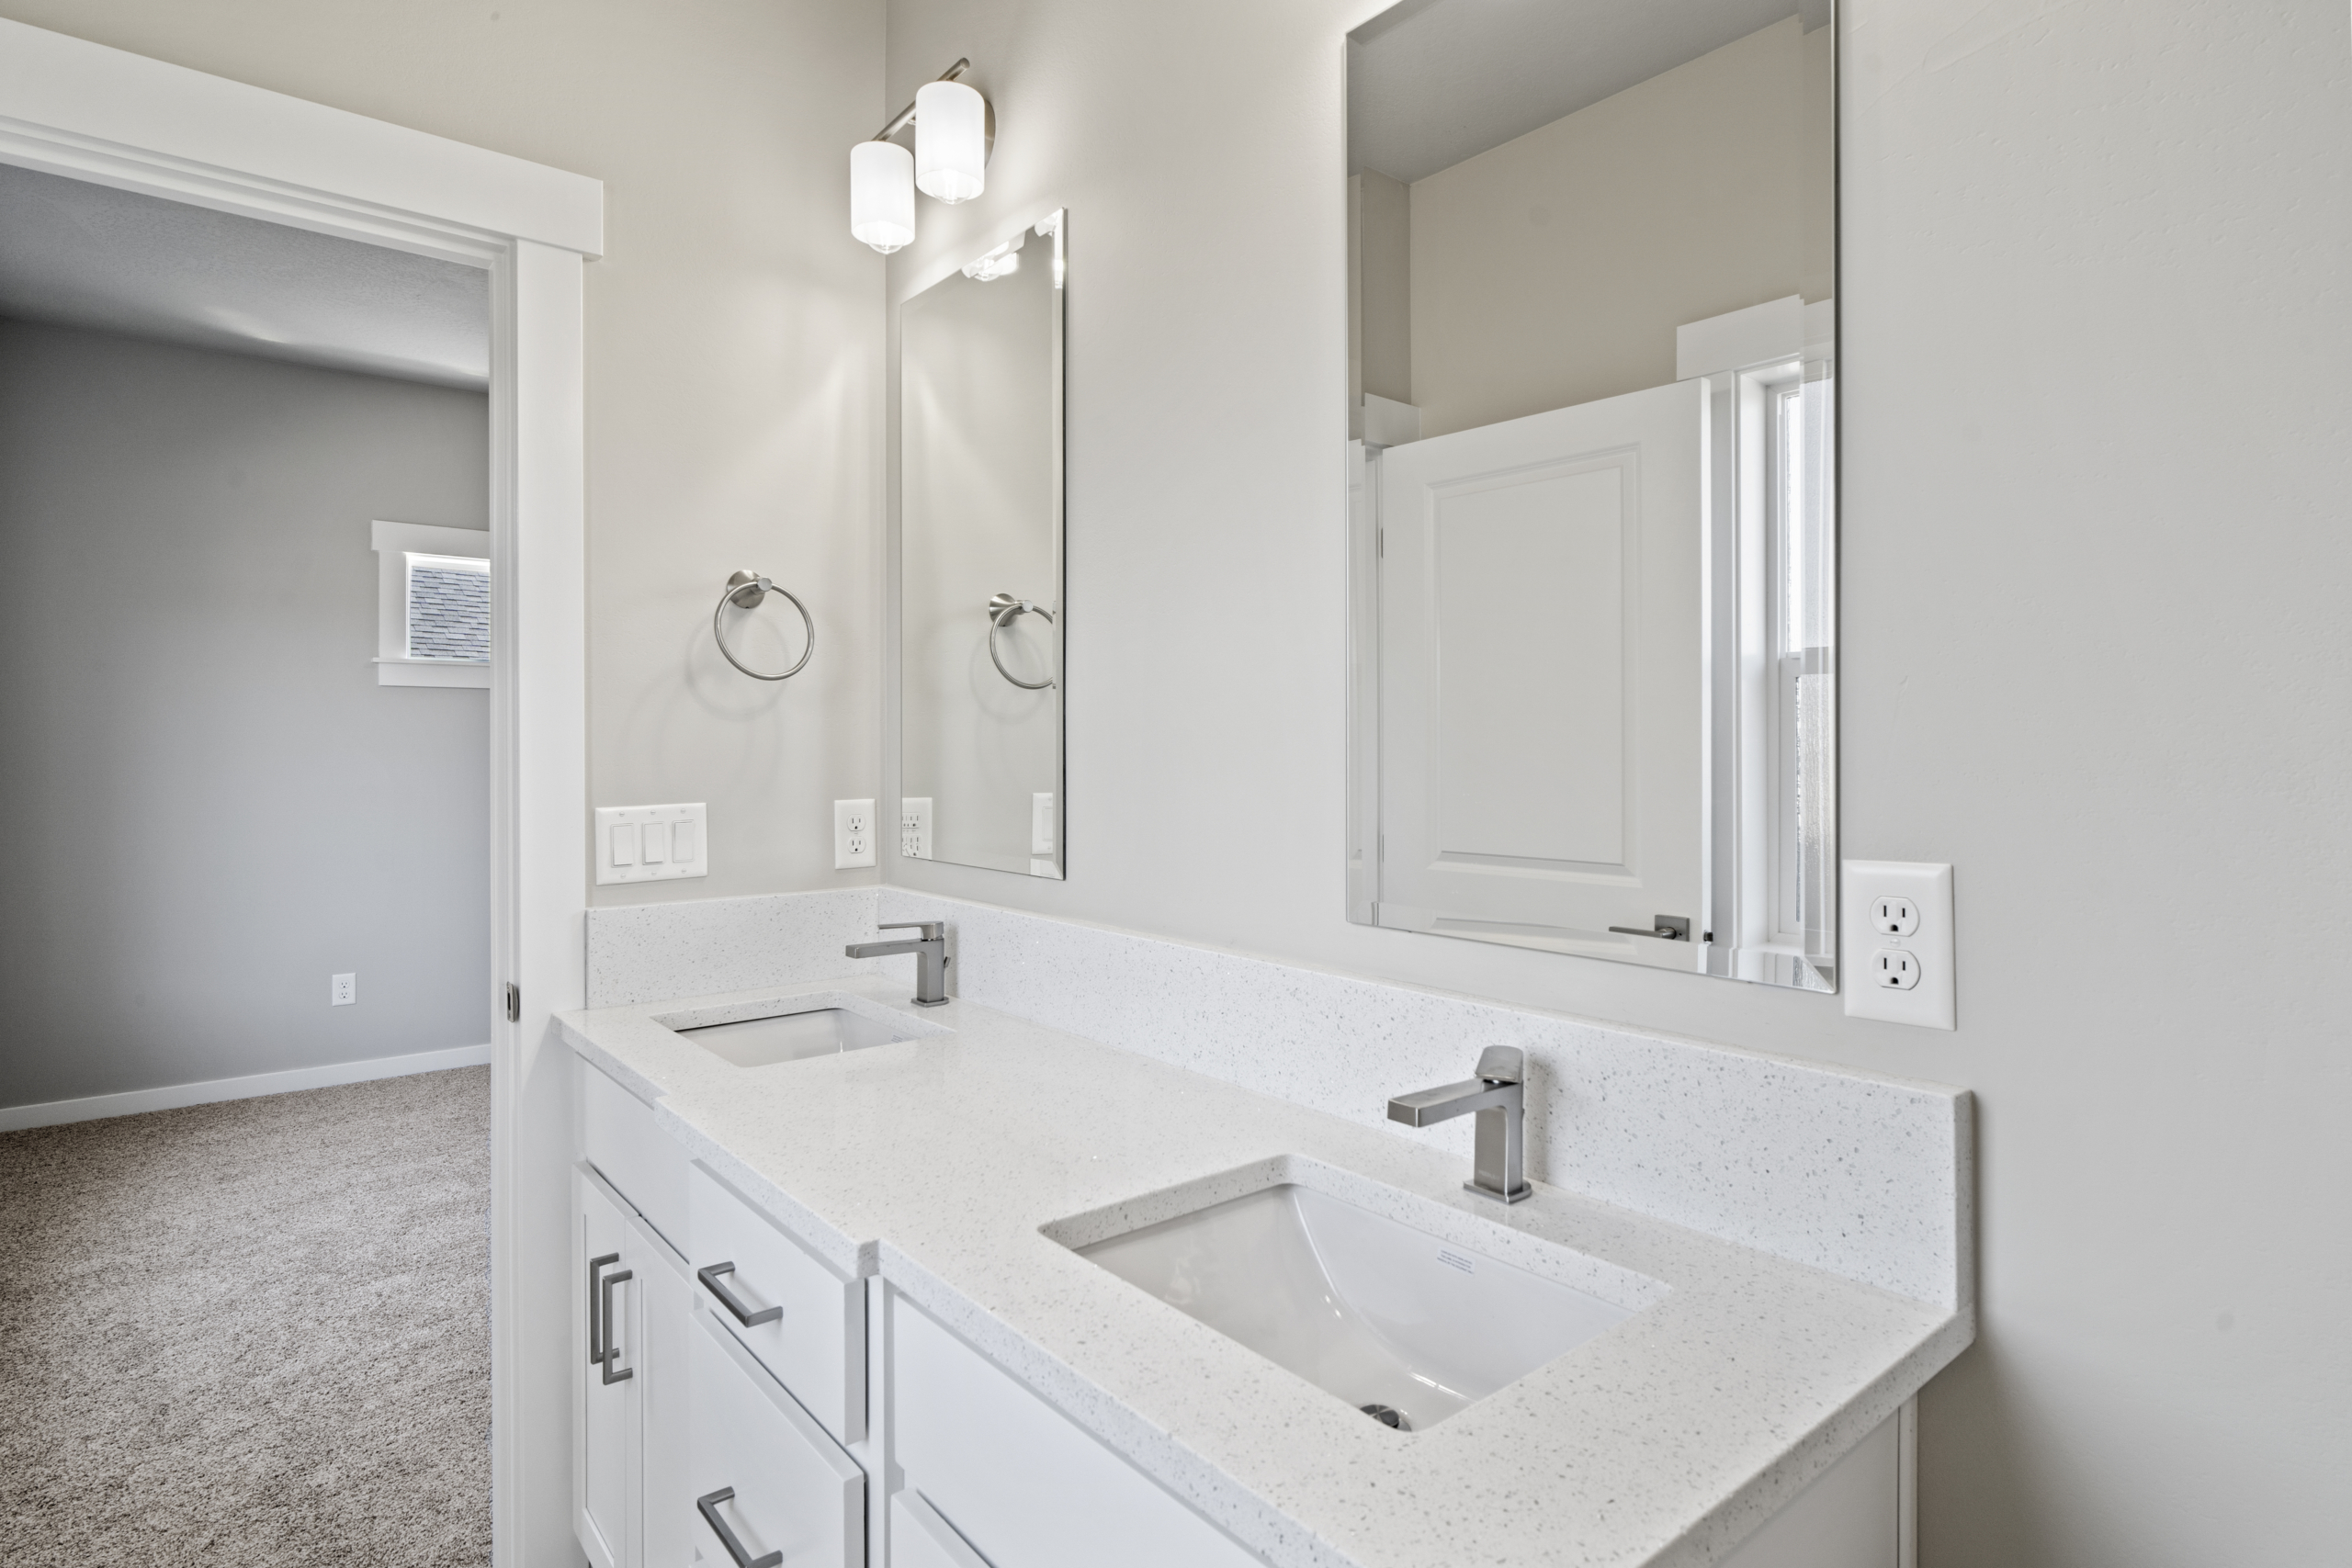 A spacious master bathroom featuring white countertops with two large mirrors, perfectly positioned above two stylish sinks.